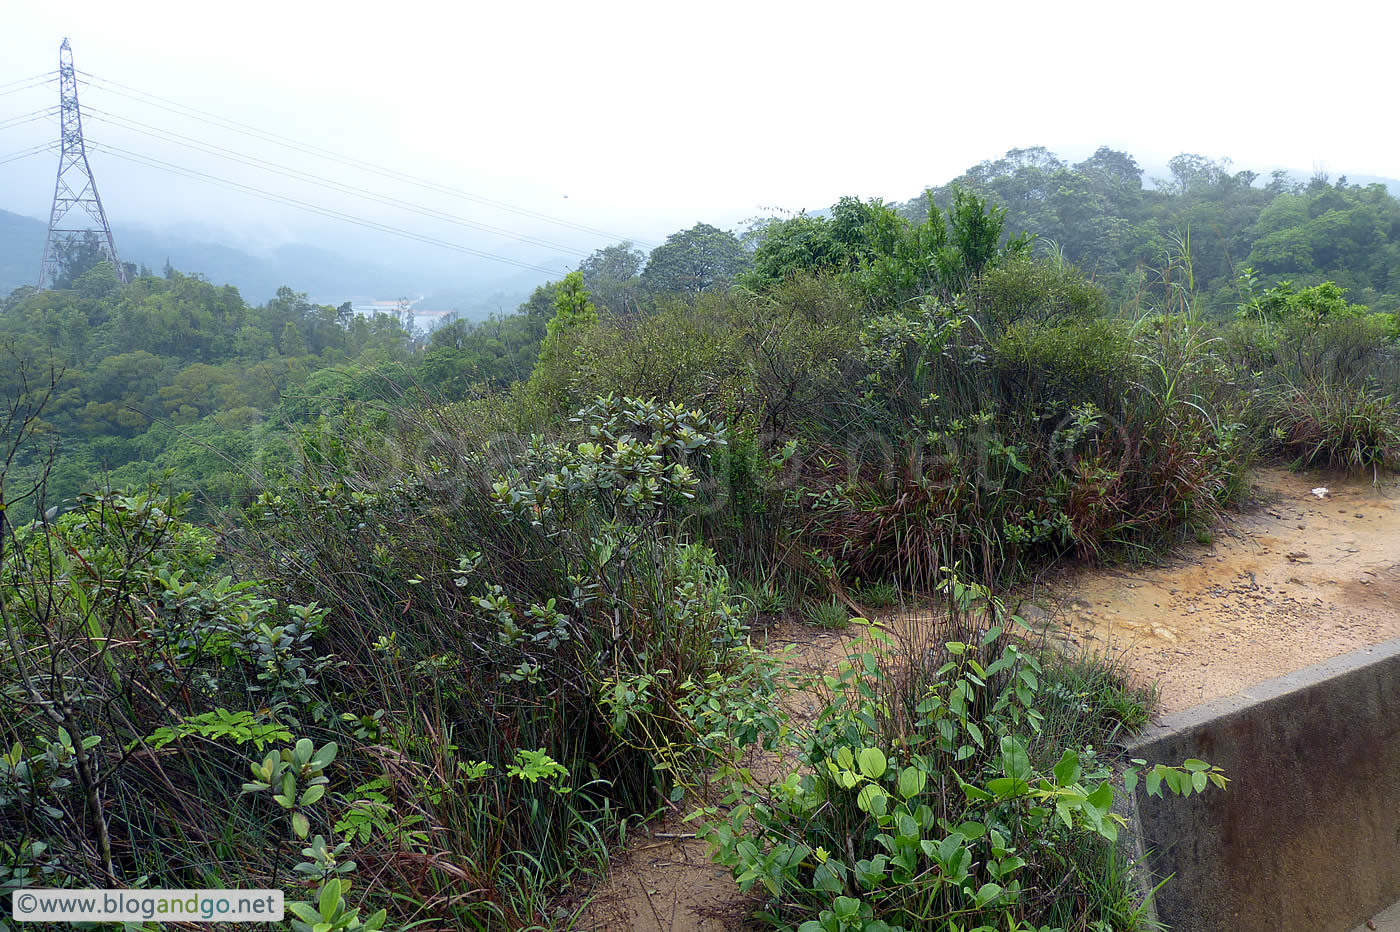 Maclehose 6 - View from the Shung Mun Redoubt kitchen trench